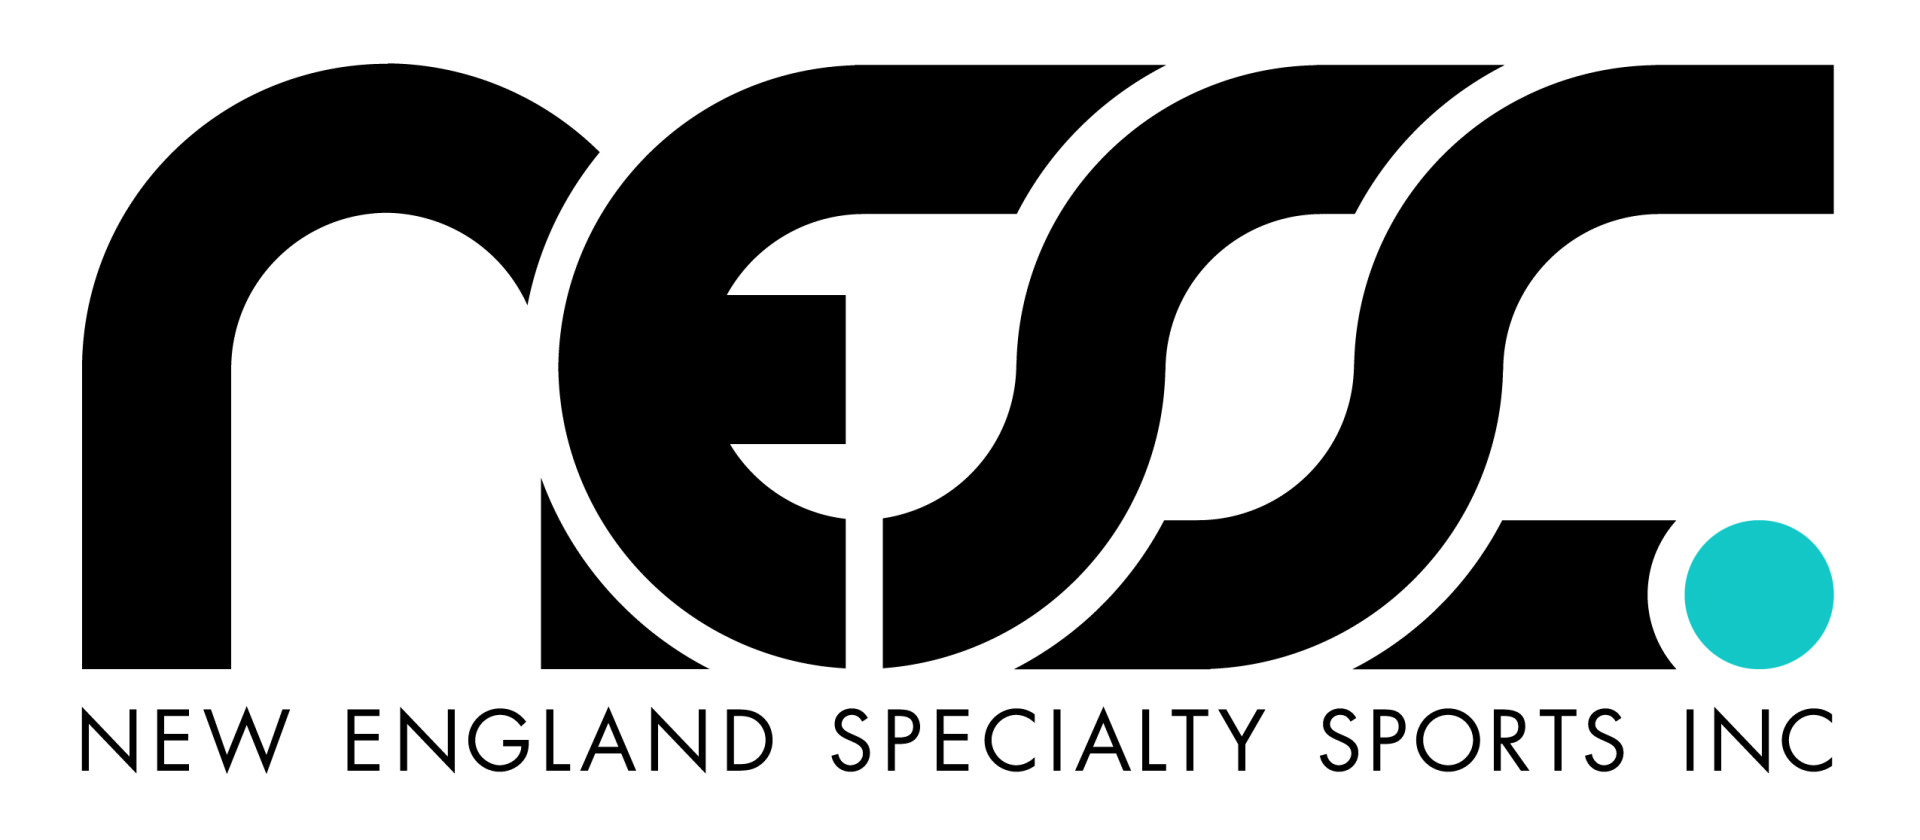 New England Specialty Sports Inc